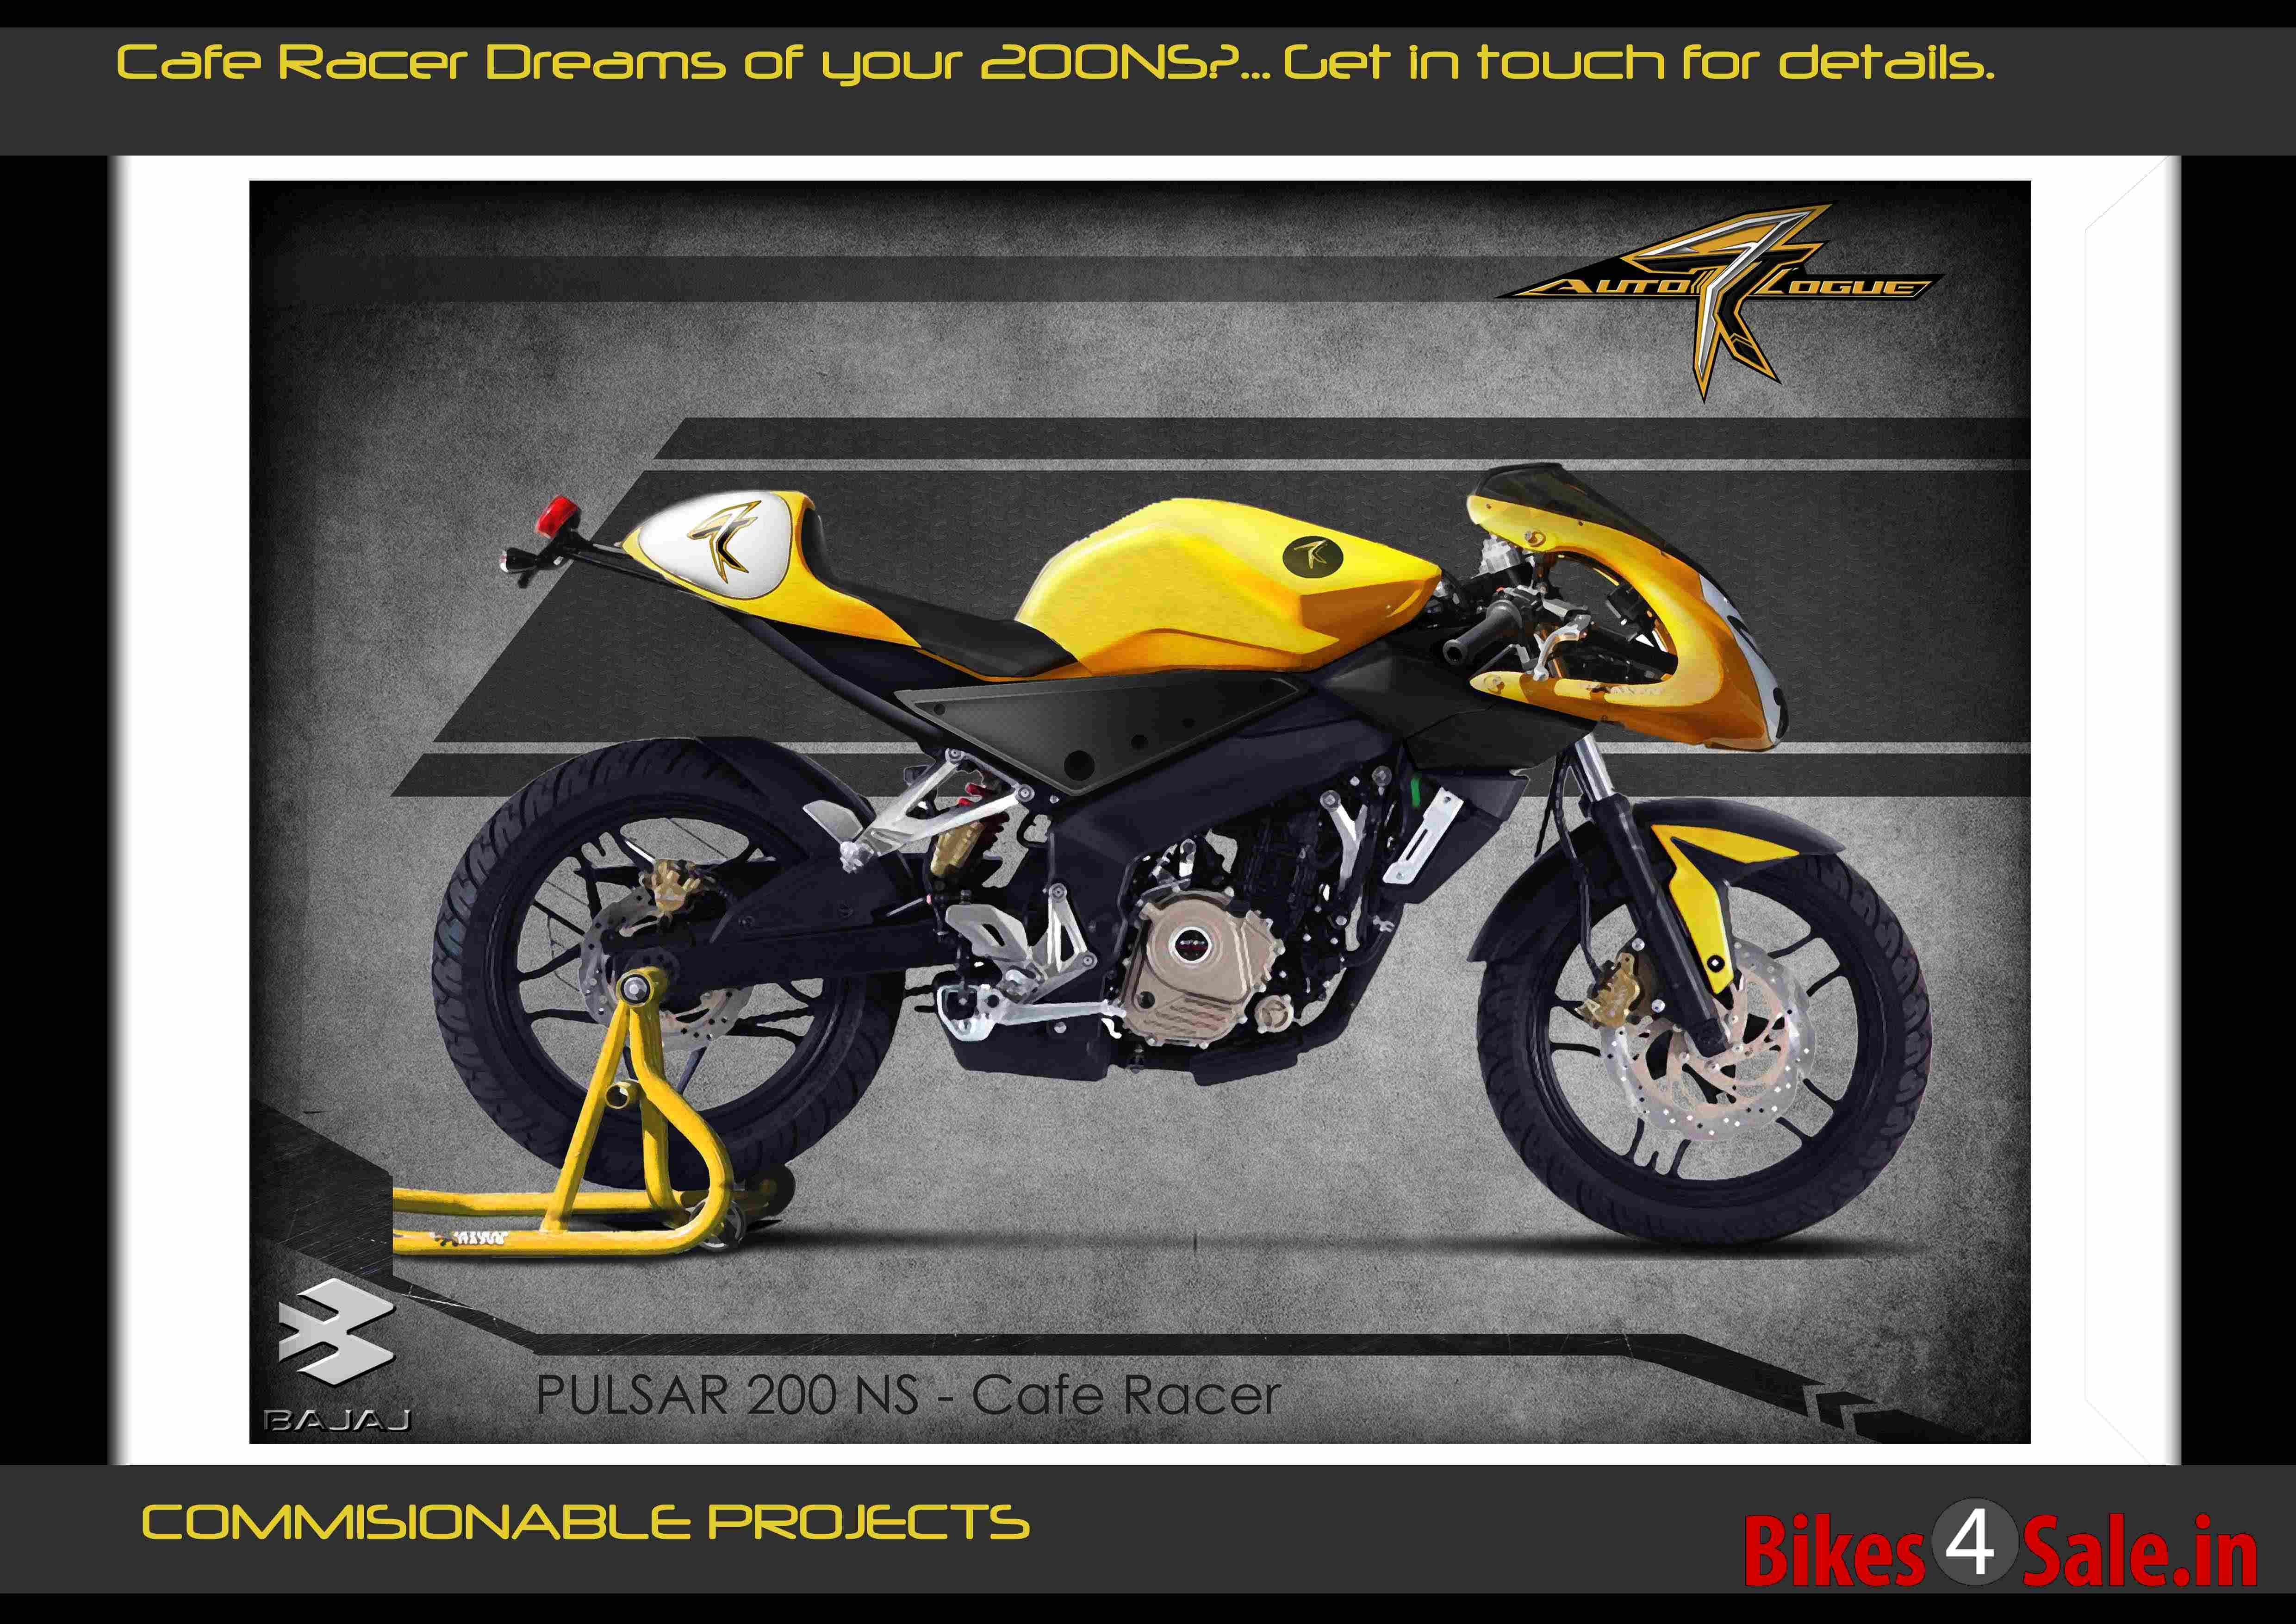 Slide 2 The Bajaj Pulsar 200ns Has Been Converted To A Cafe